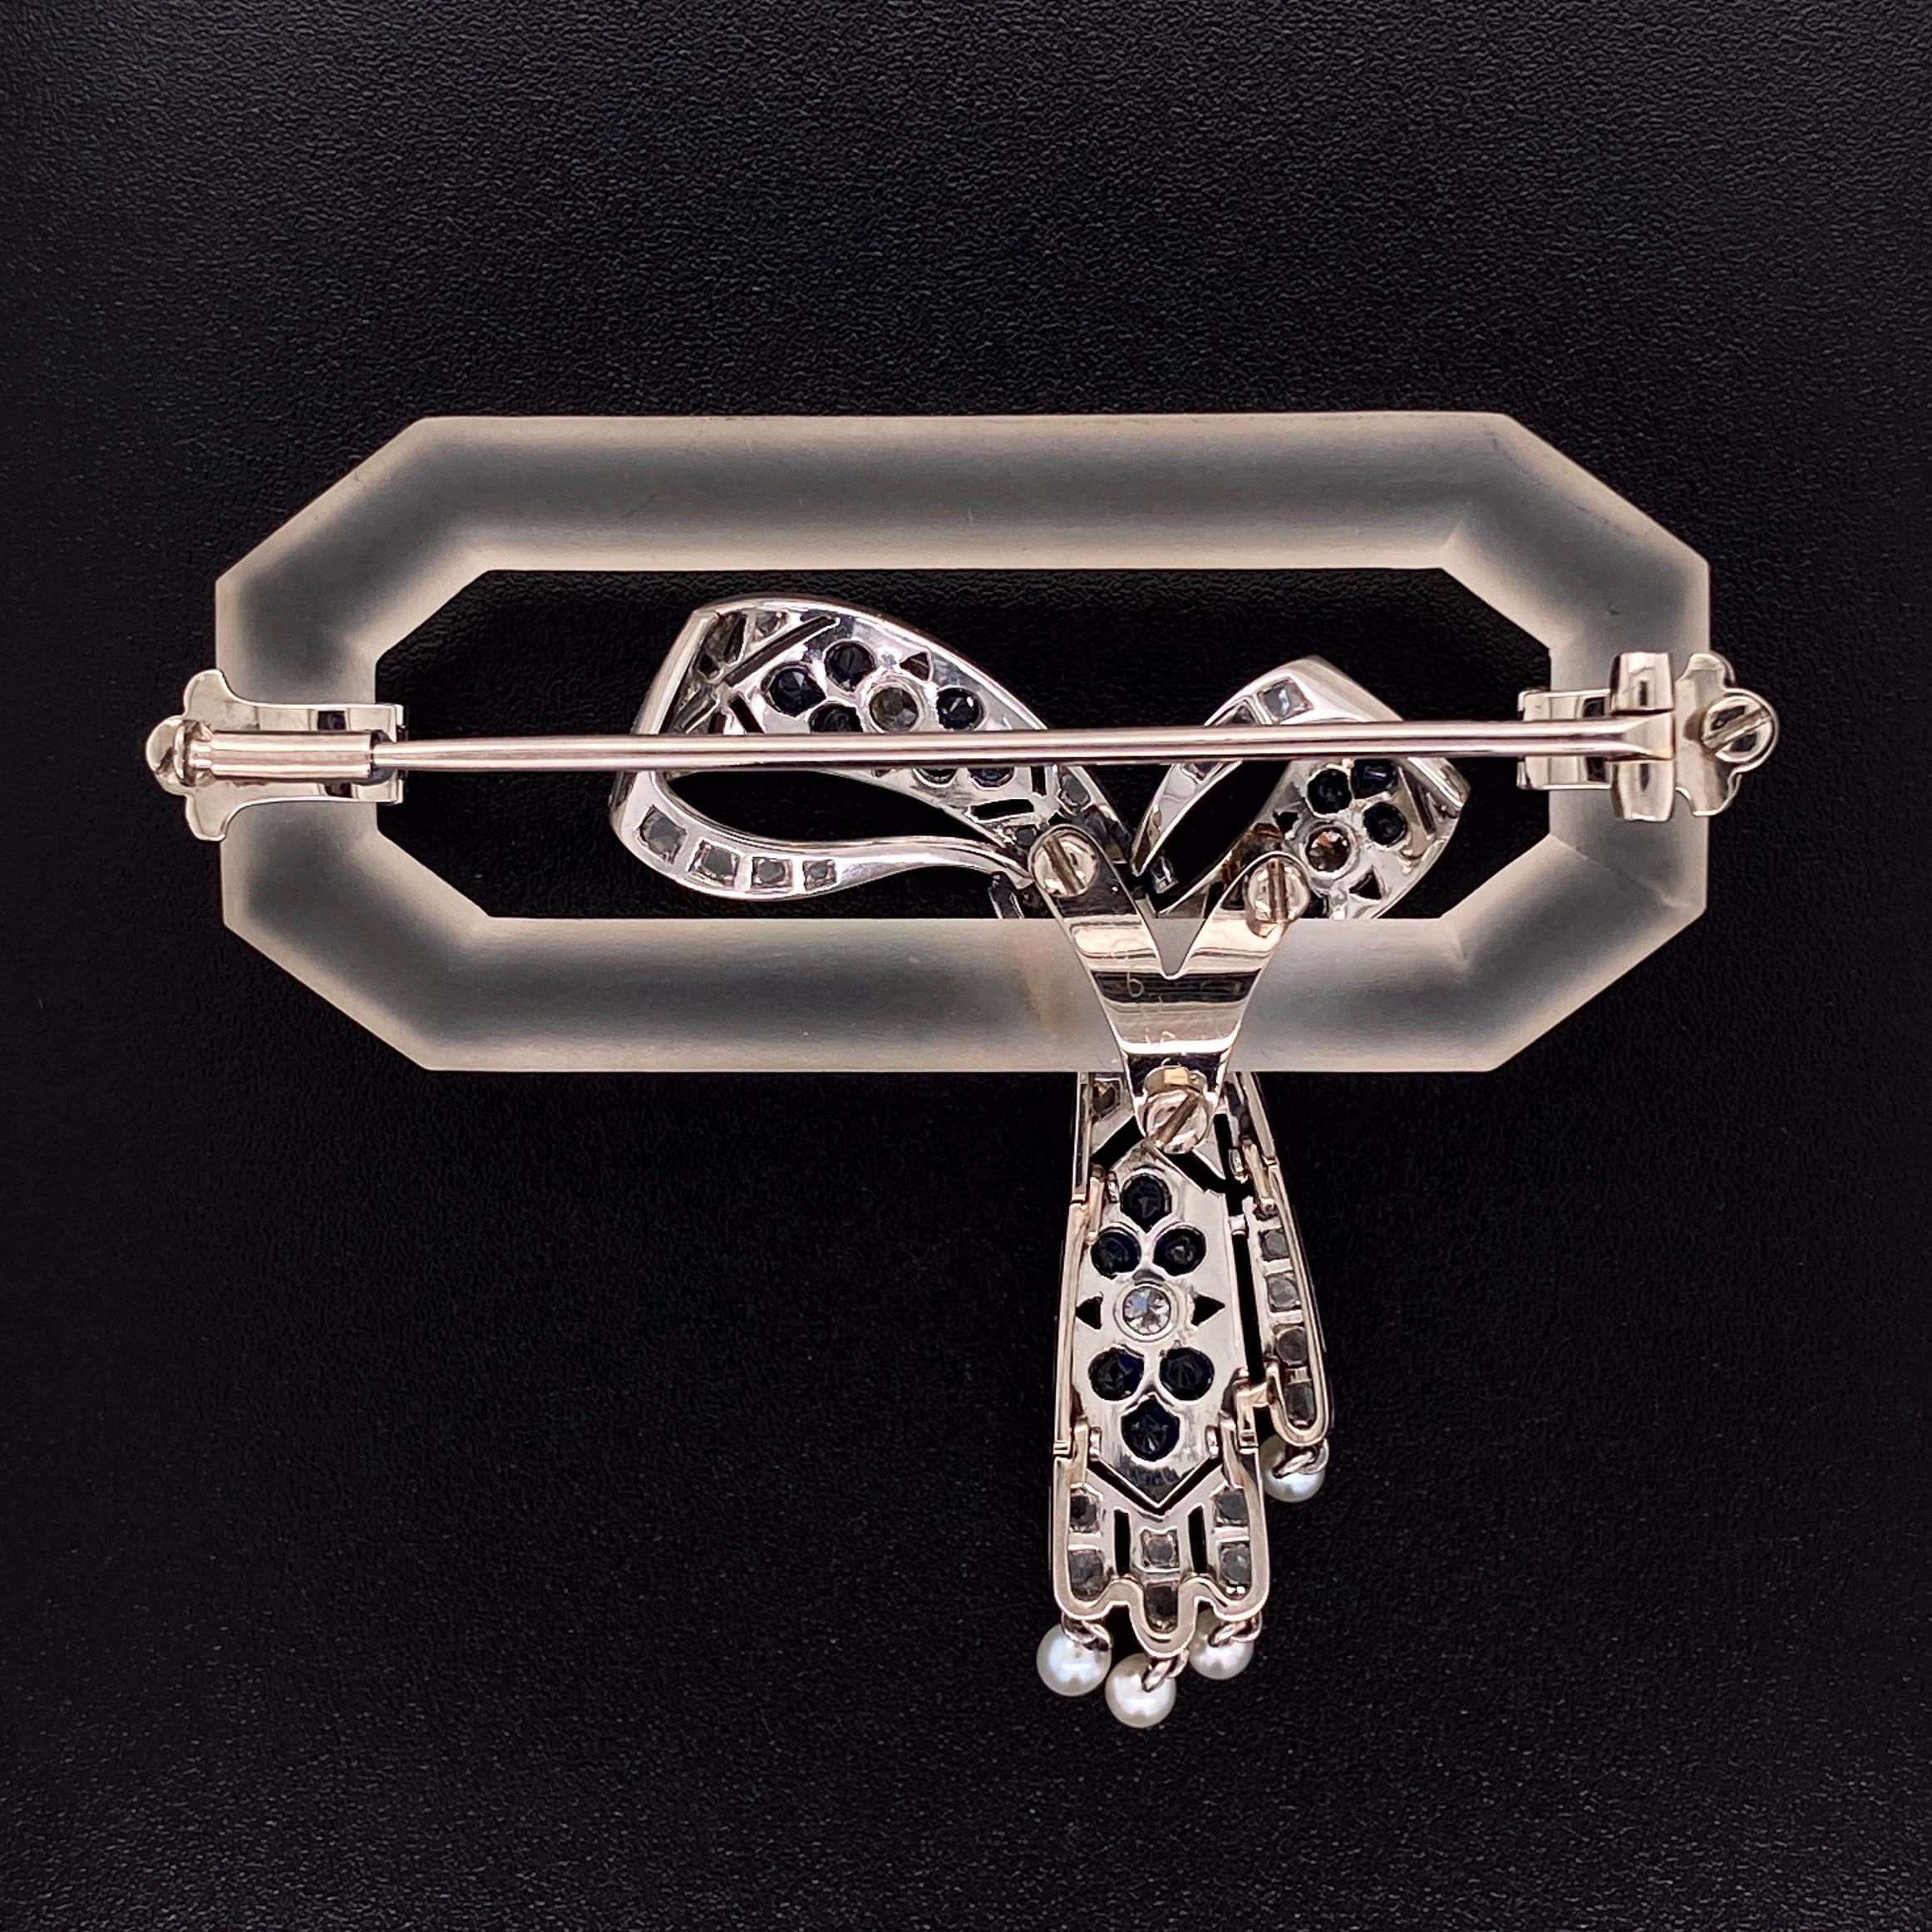 Simply Fabulous Art Deco Quartz Crystal, Diamond and Sapphire Hand crafted Platinum Brooch. Securely set with 50 rose cut diamonds, approx. 0.65tcw, 3 round diamonds approx. 0.18tcw, weighing approx. 0.83 total carat weight, 18 custom calibre blue